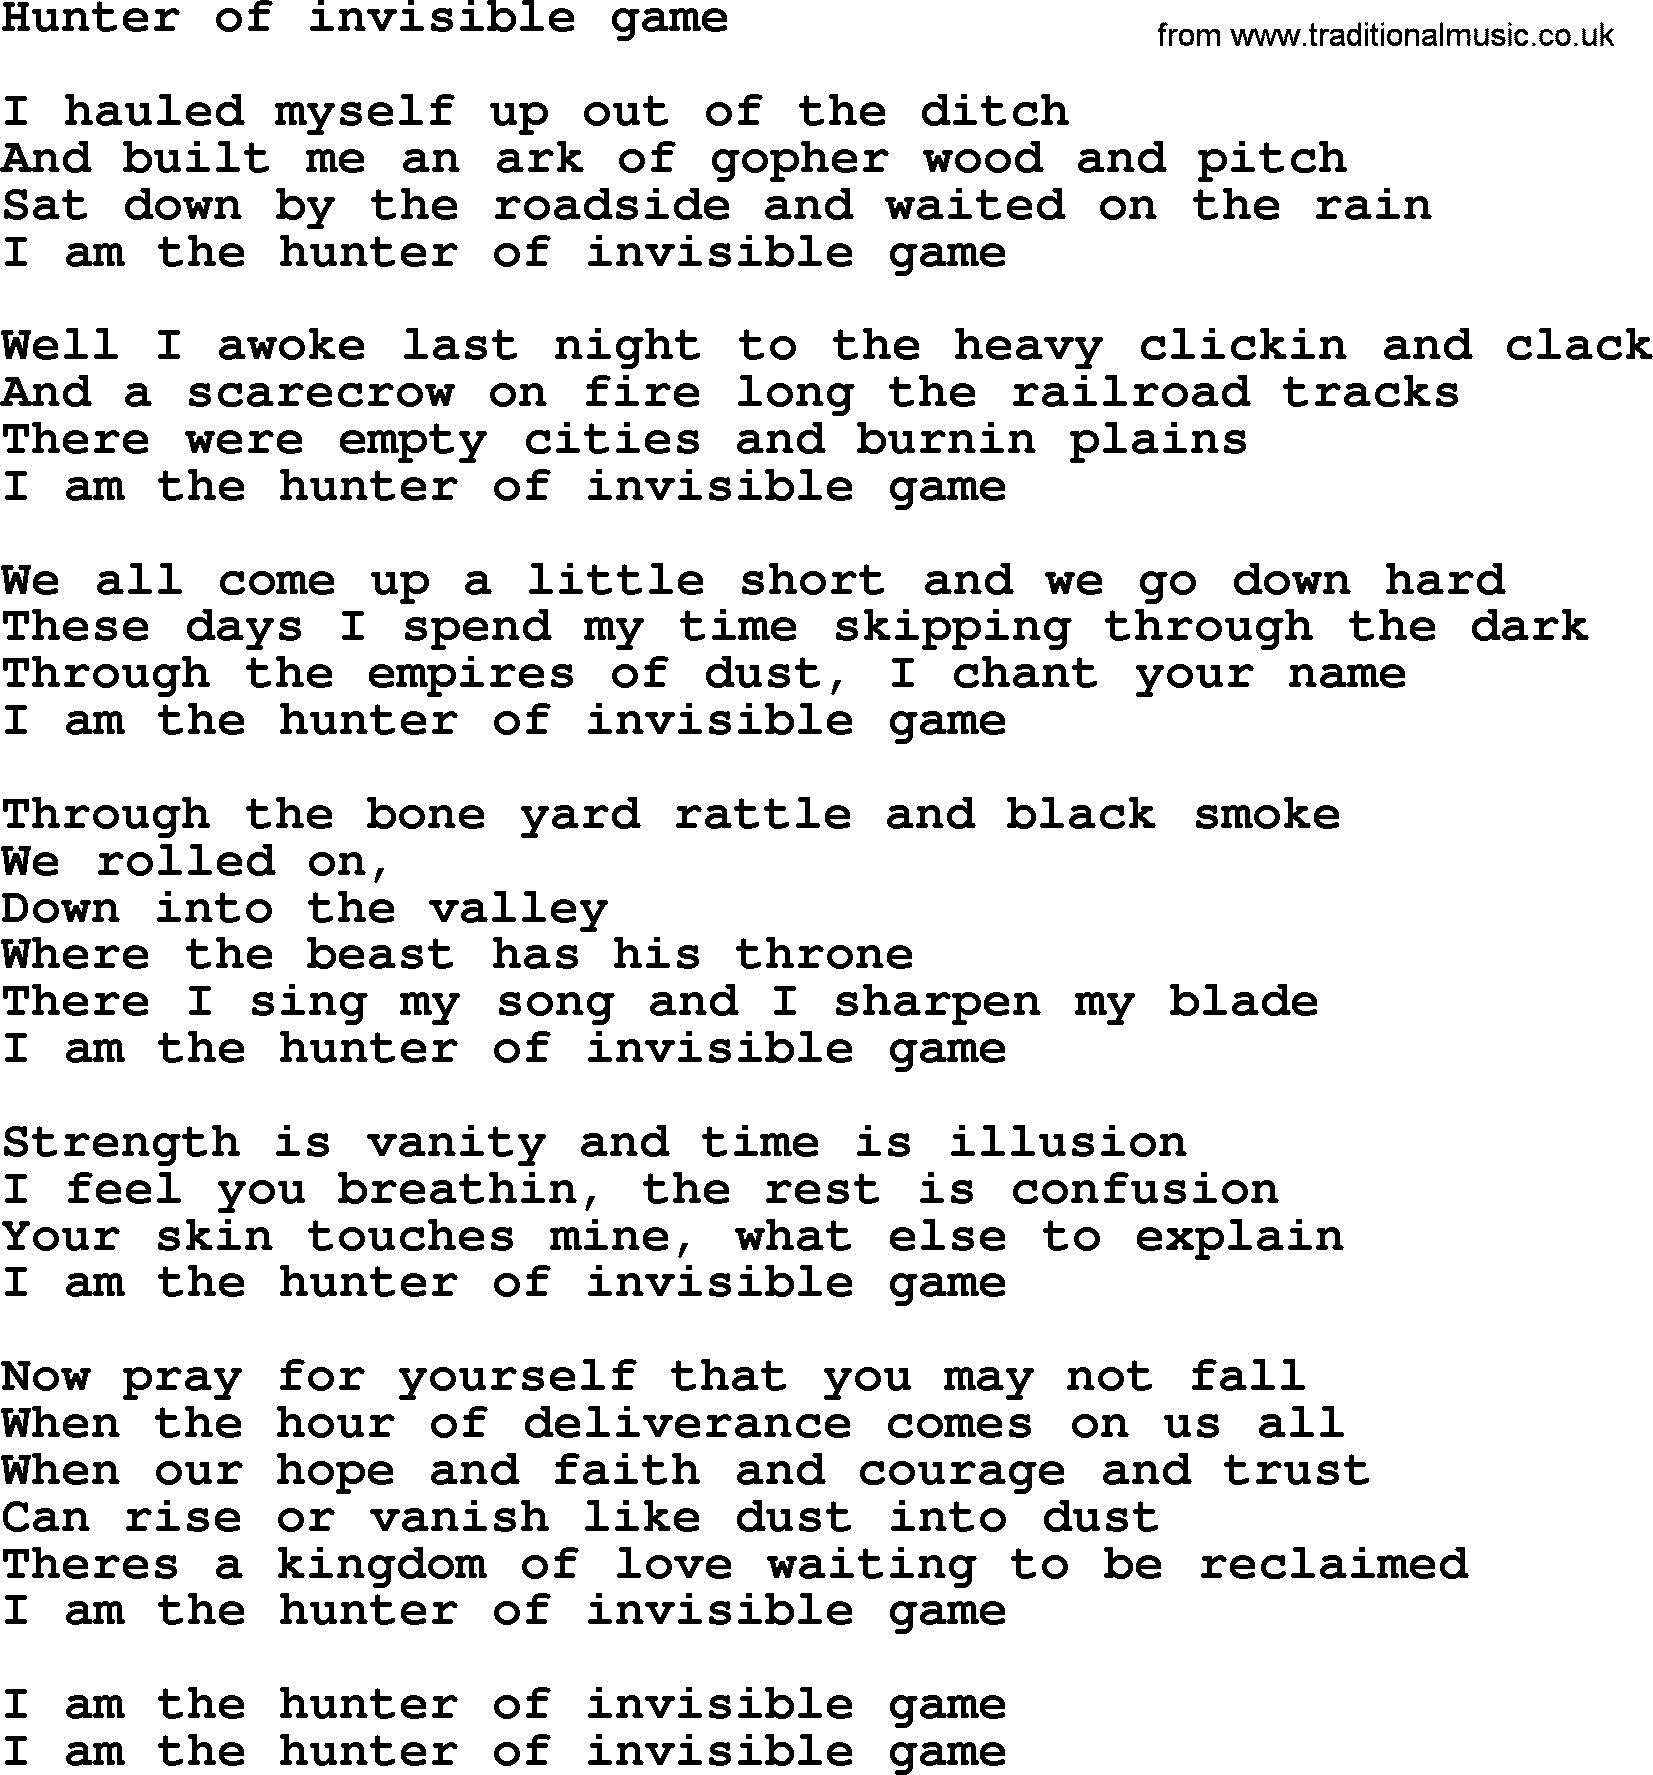 Bruce Springsteen song: Hunter Of Invisible Game lyrics